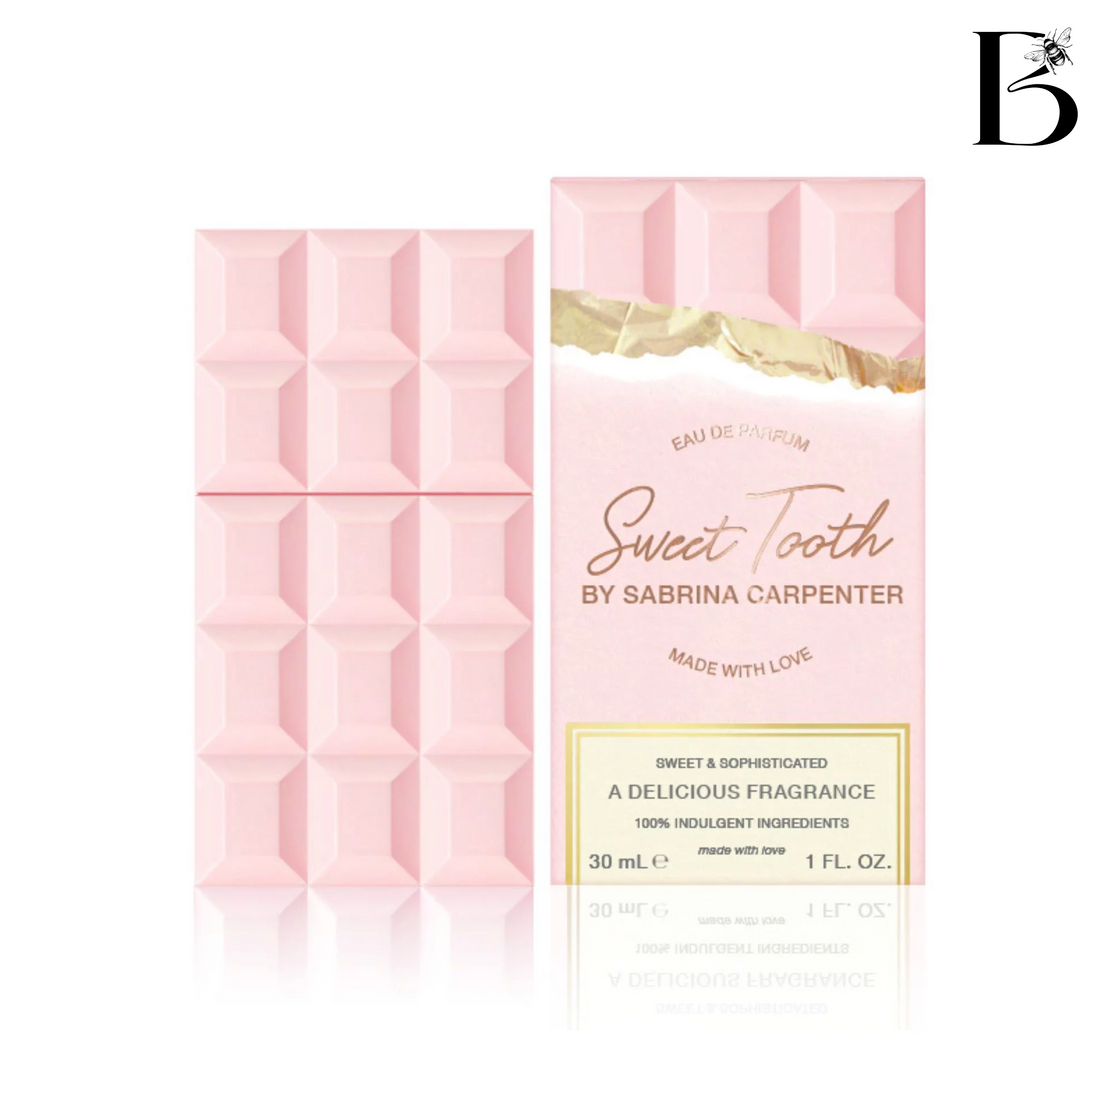 SWEET TOOTH GIFT SET PREVENTA